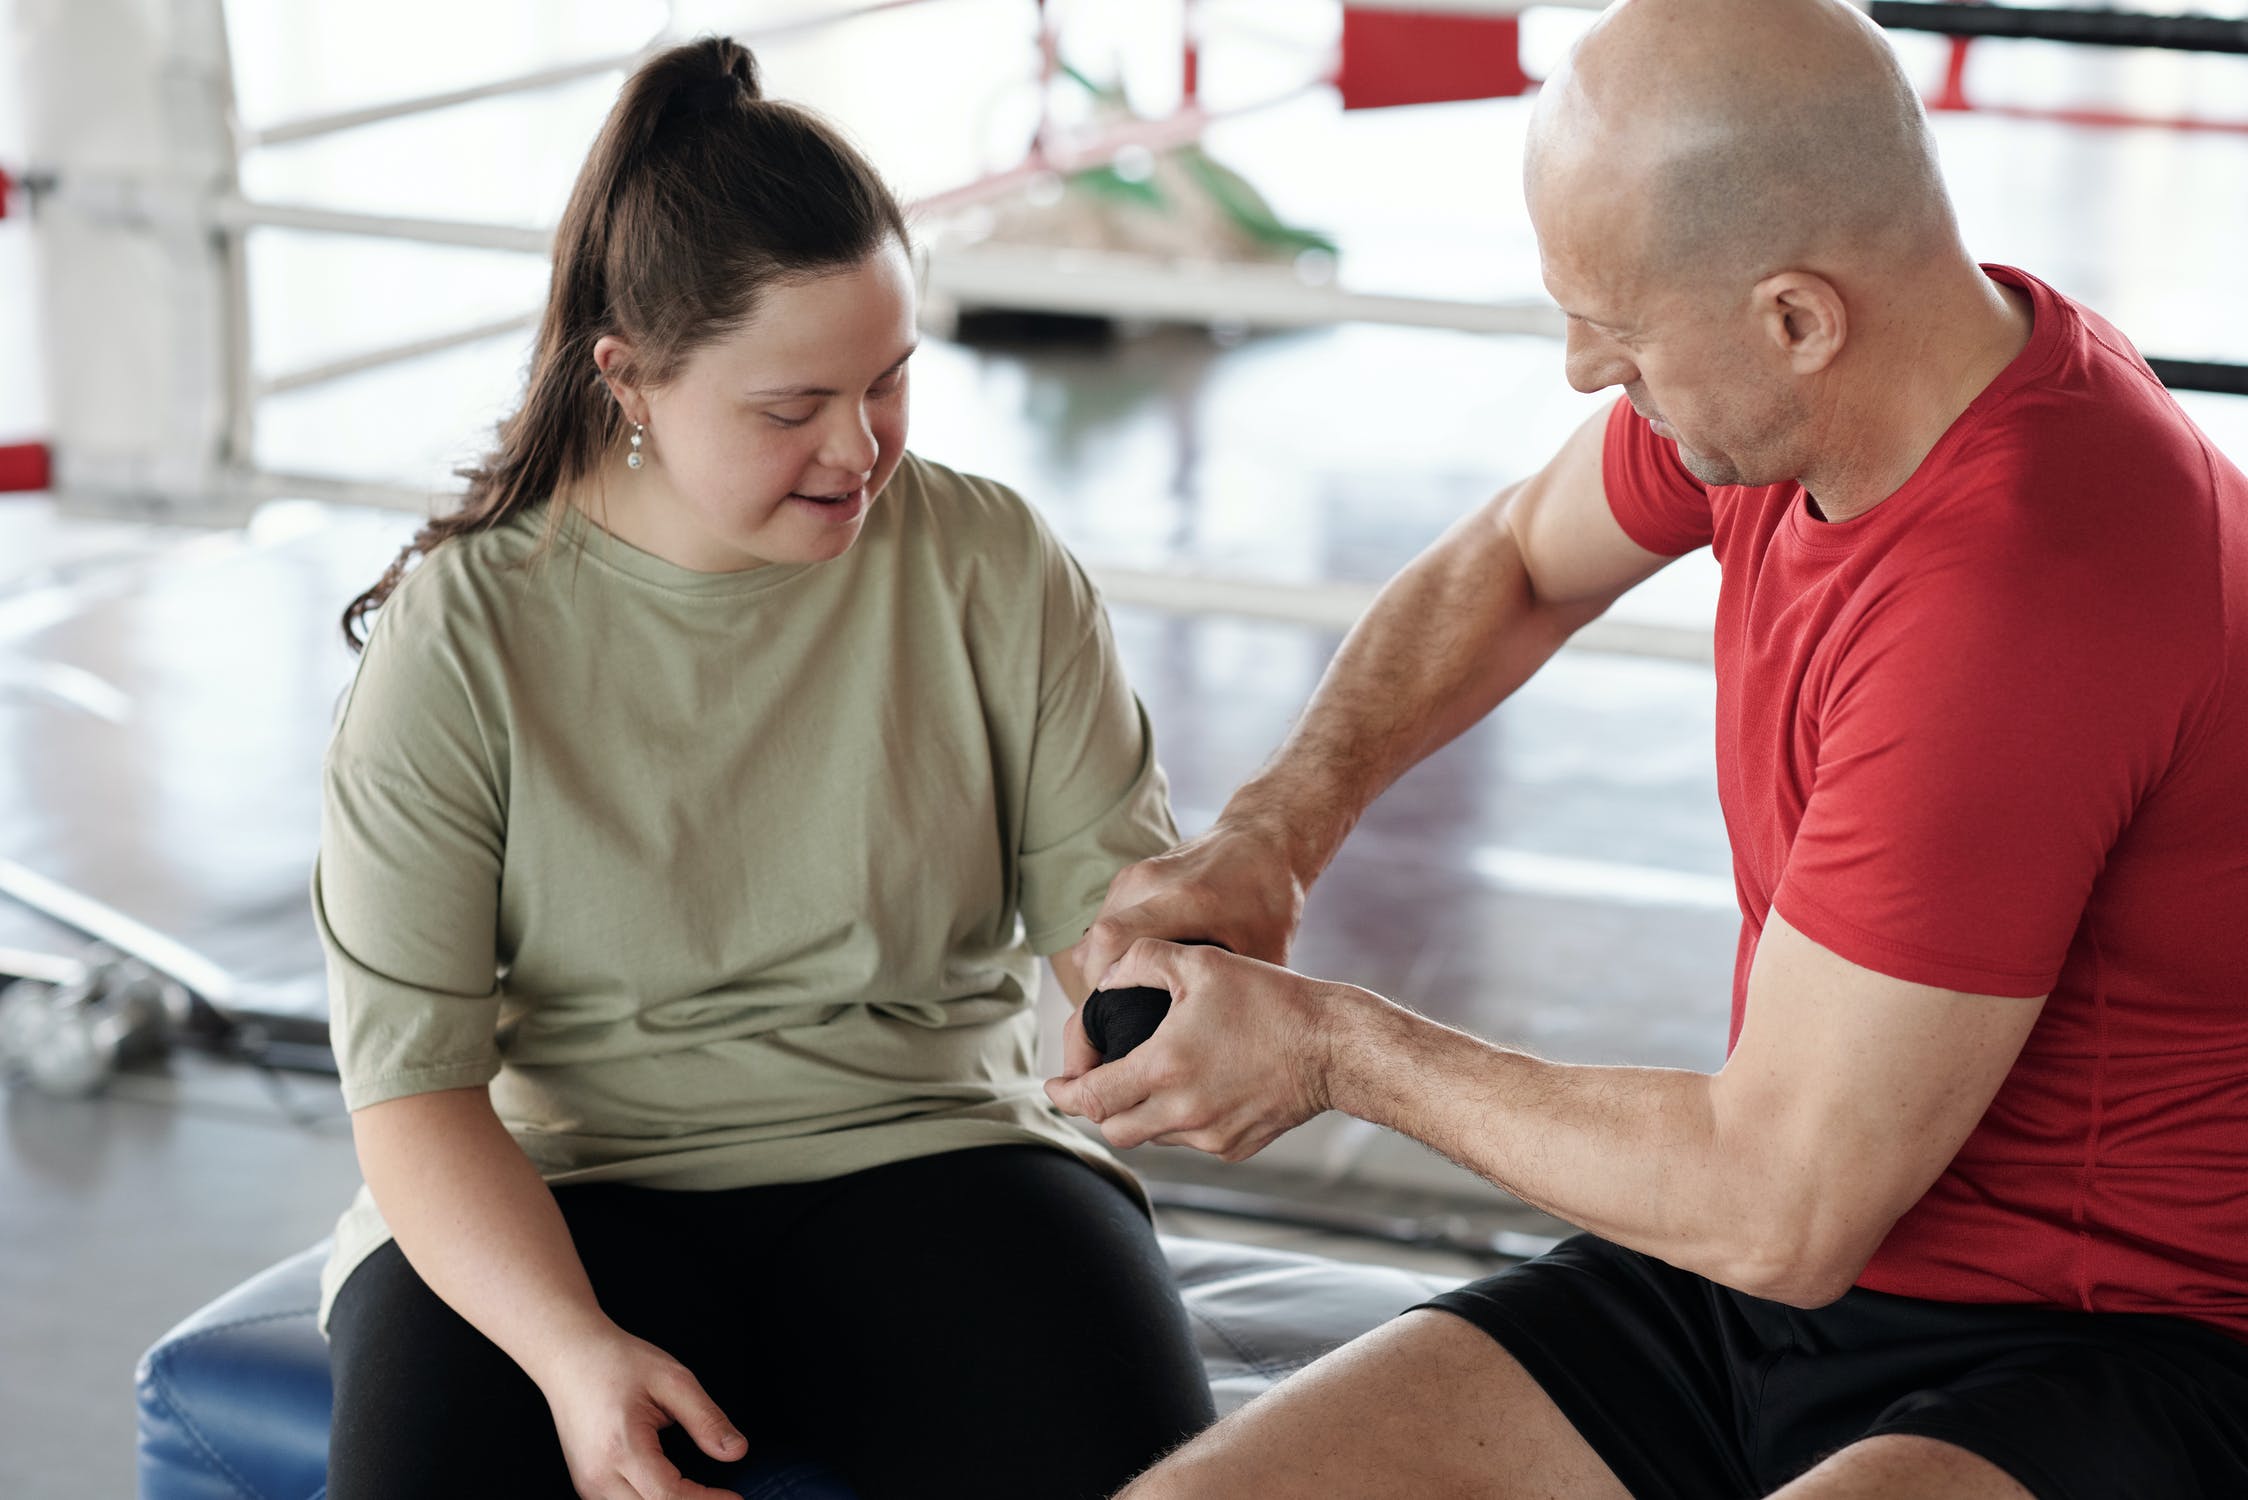 What Customers Are Looking for in a Personal Trainer